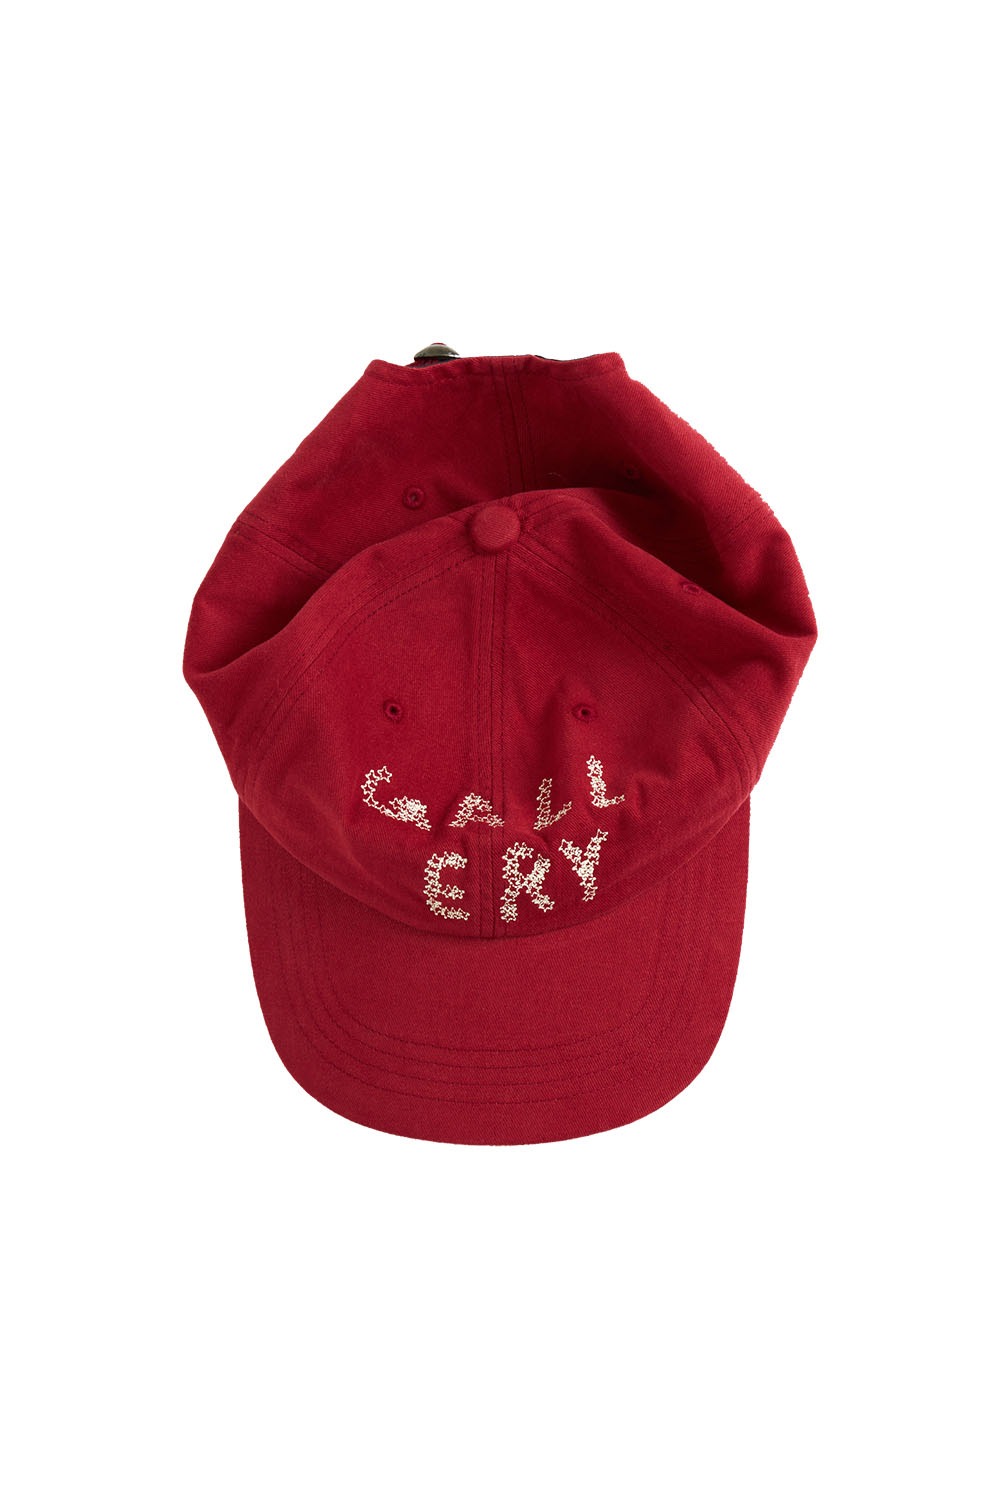 Gallery Embroidered Ball Cap - Red